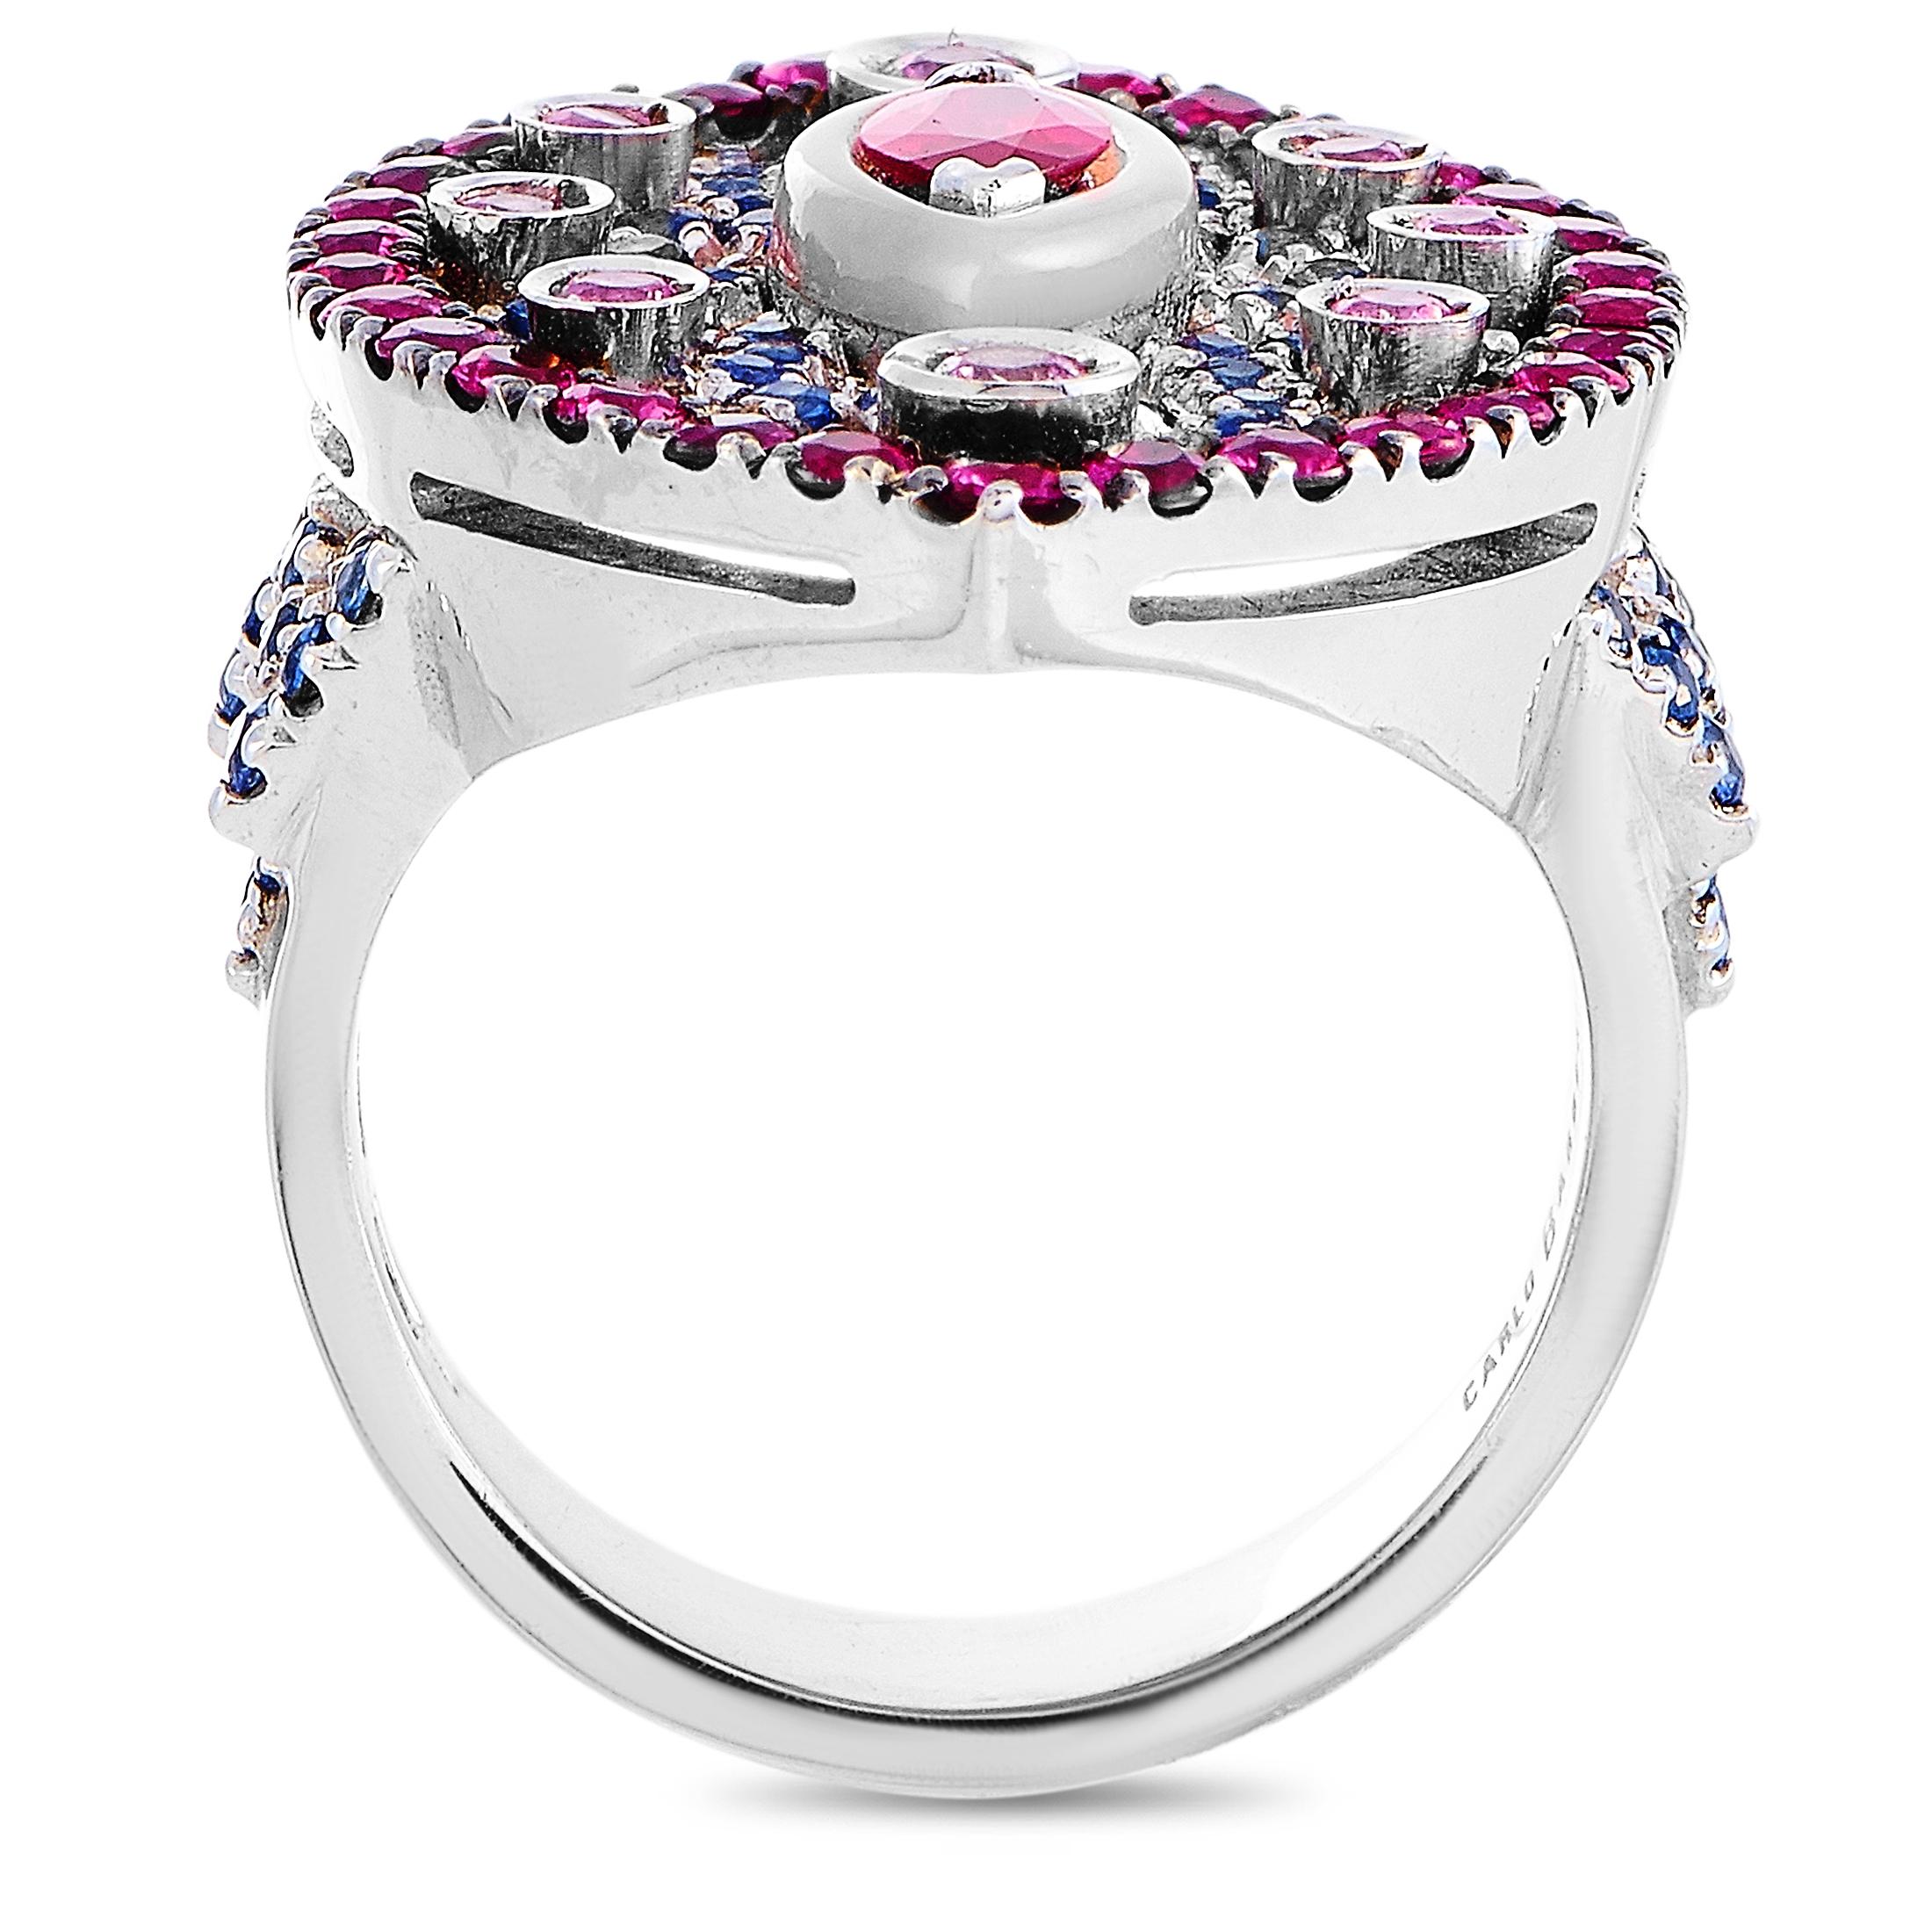 This Carlo Barberis ring is crafted from 18K white gold and embellished with sapphires and rubies. The ring weighs 14.7 grams, boasting band thickness of 4 mm and top height of 4 mm, while top dimensions measure 22 by 19 mm.
 
 Offered in brand new